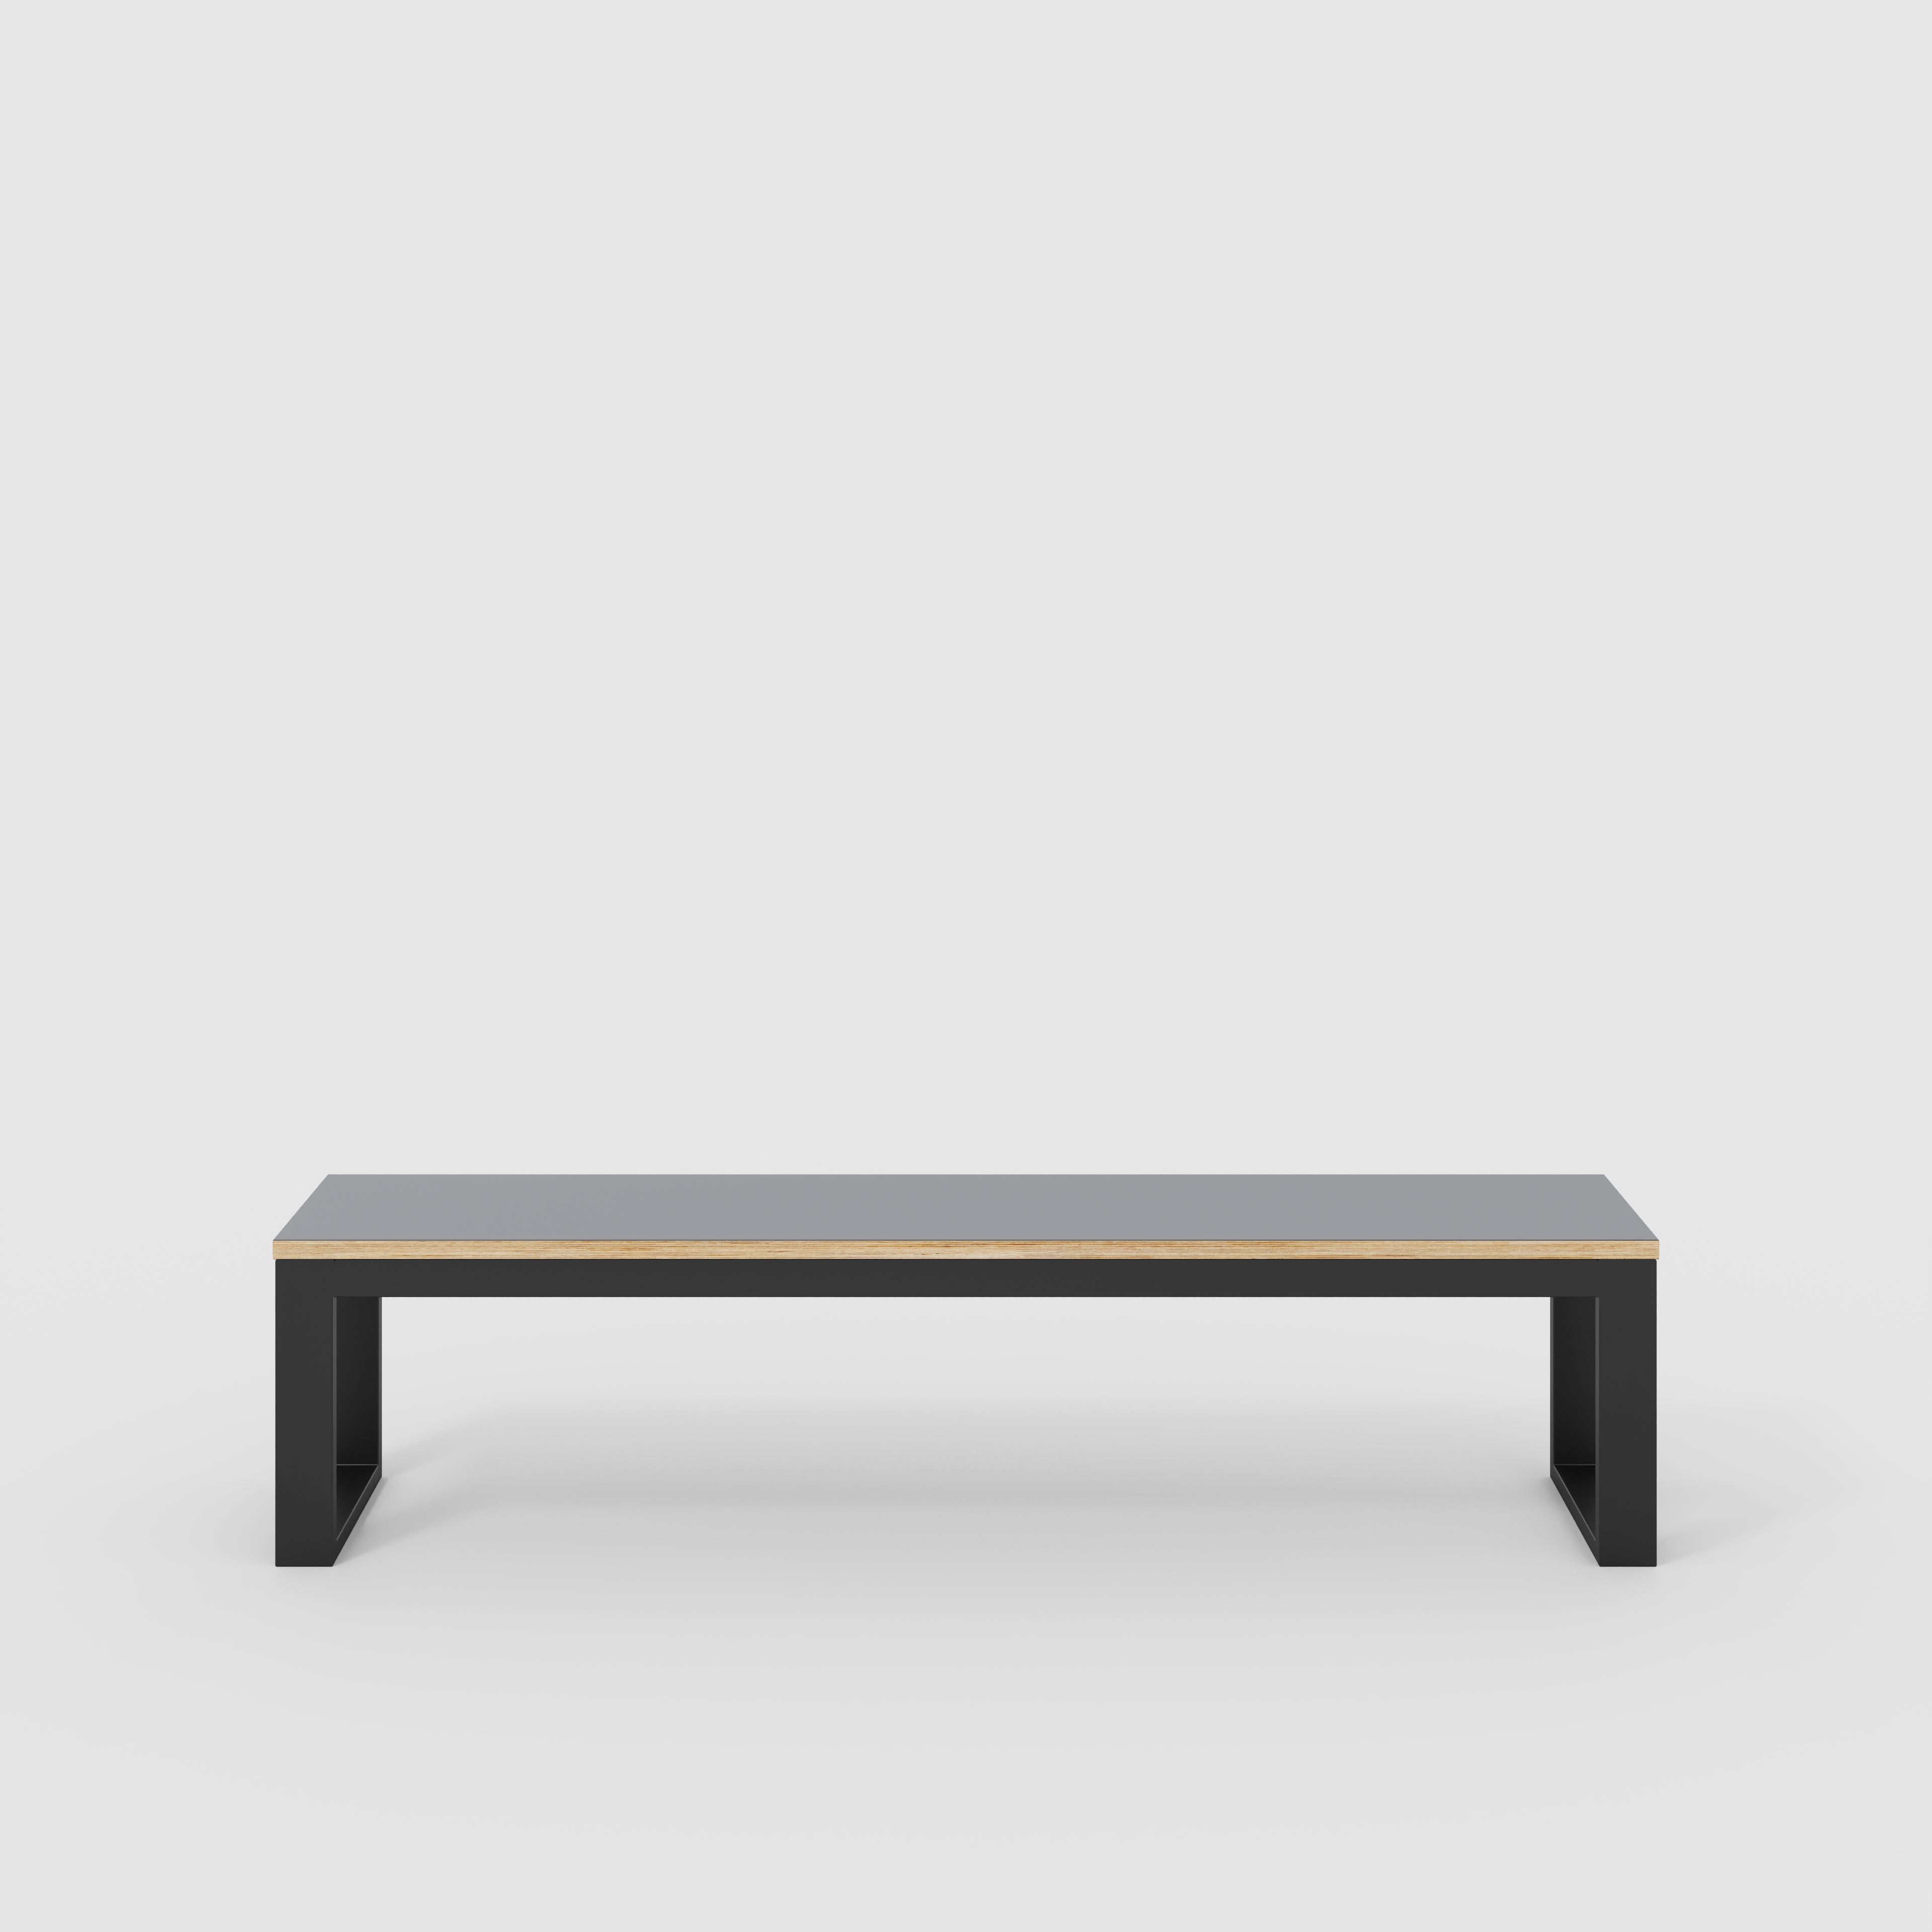 Bench Seat with Black Industrial Frame - Formica Tornado Grey - 1800(w) x 325(d)